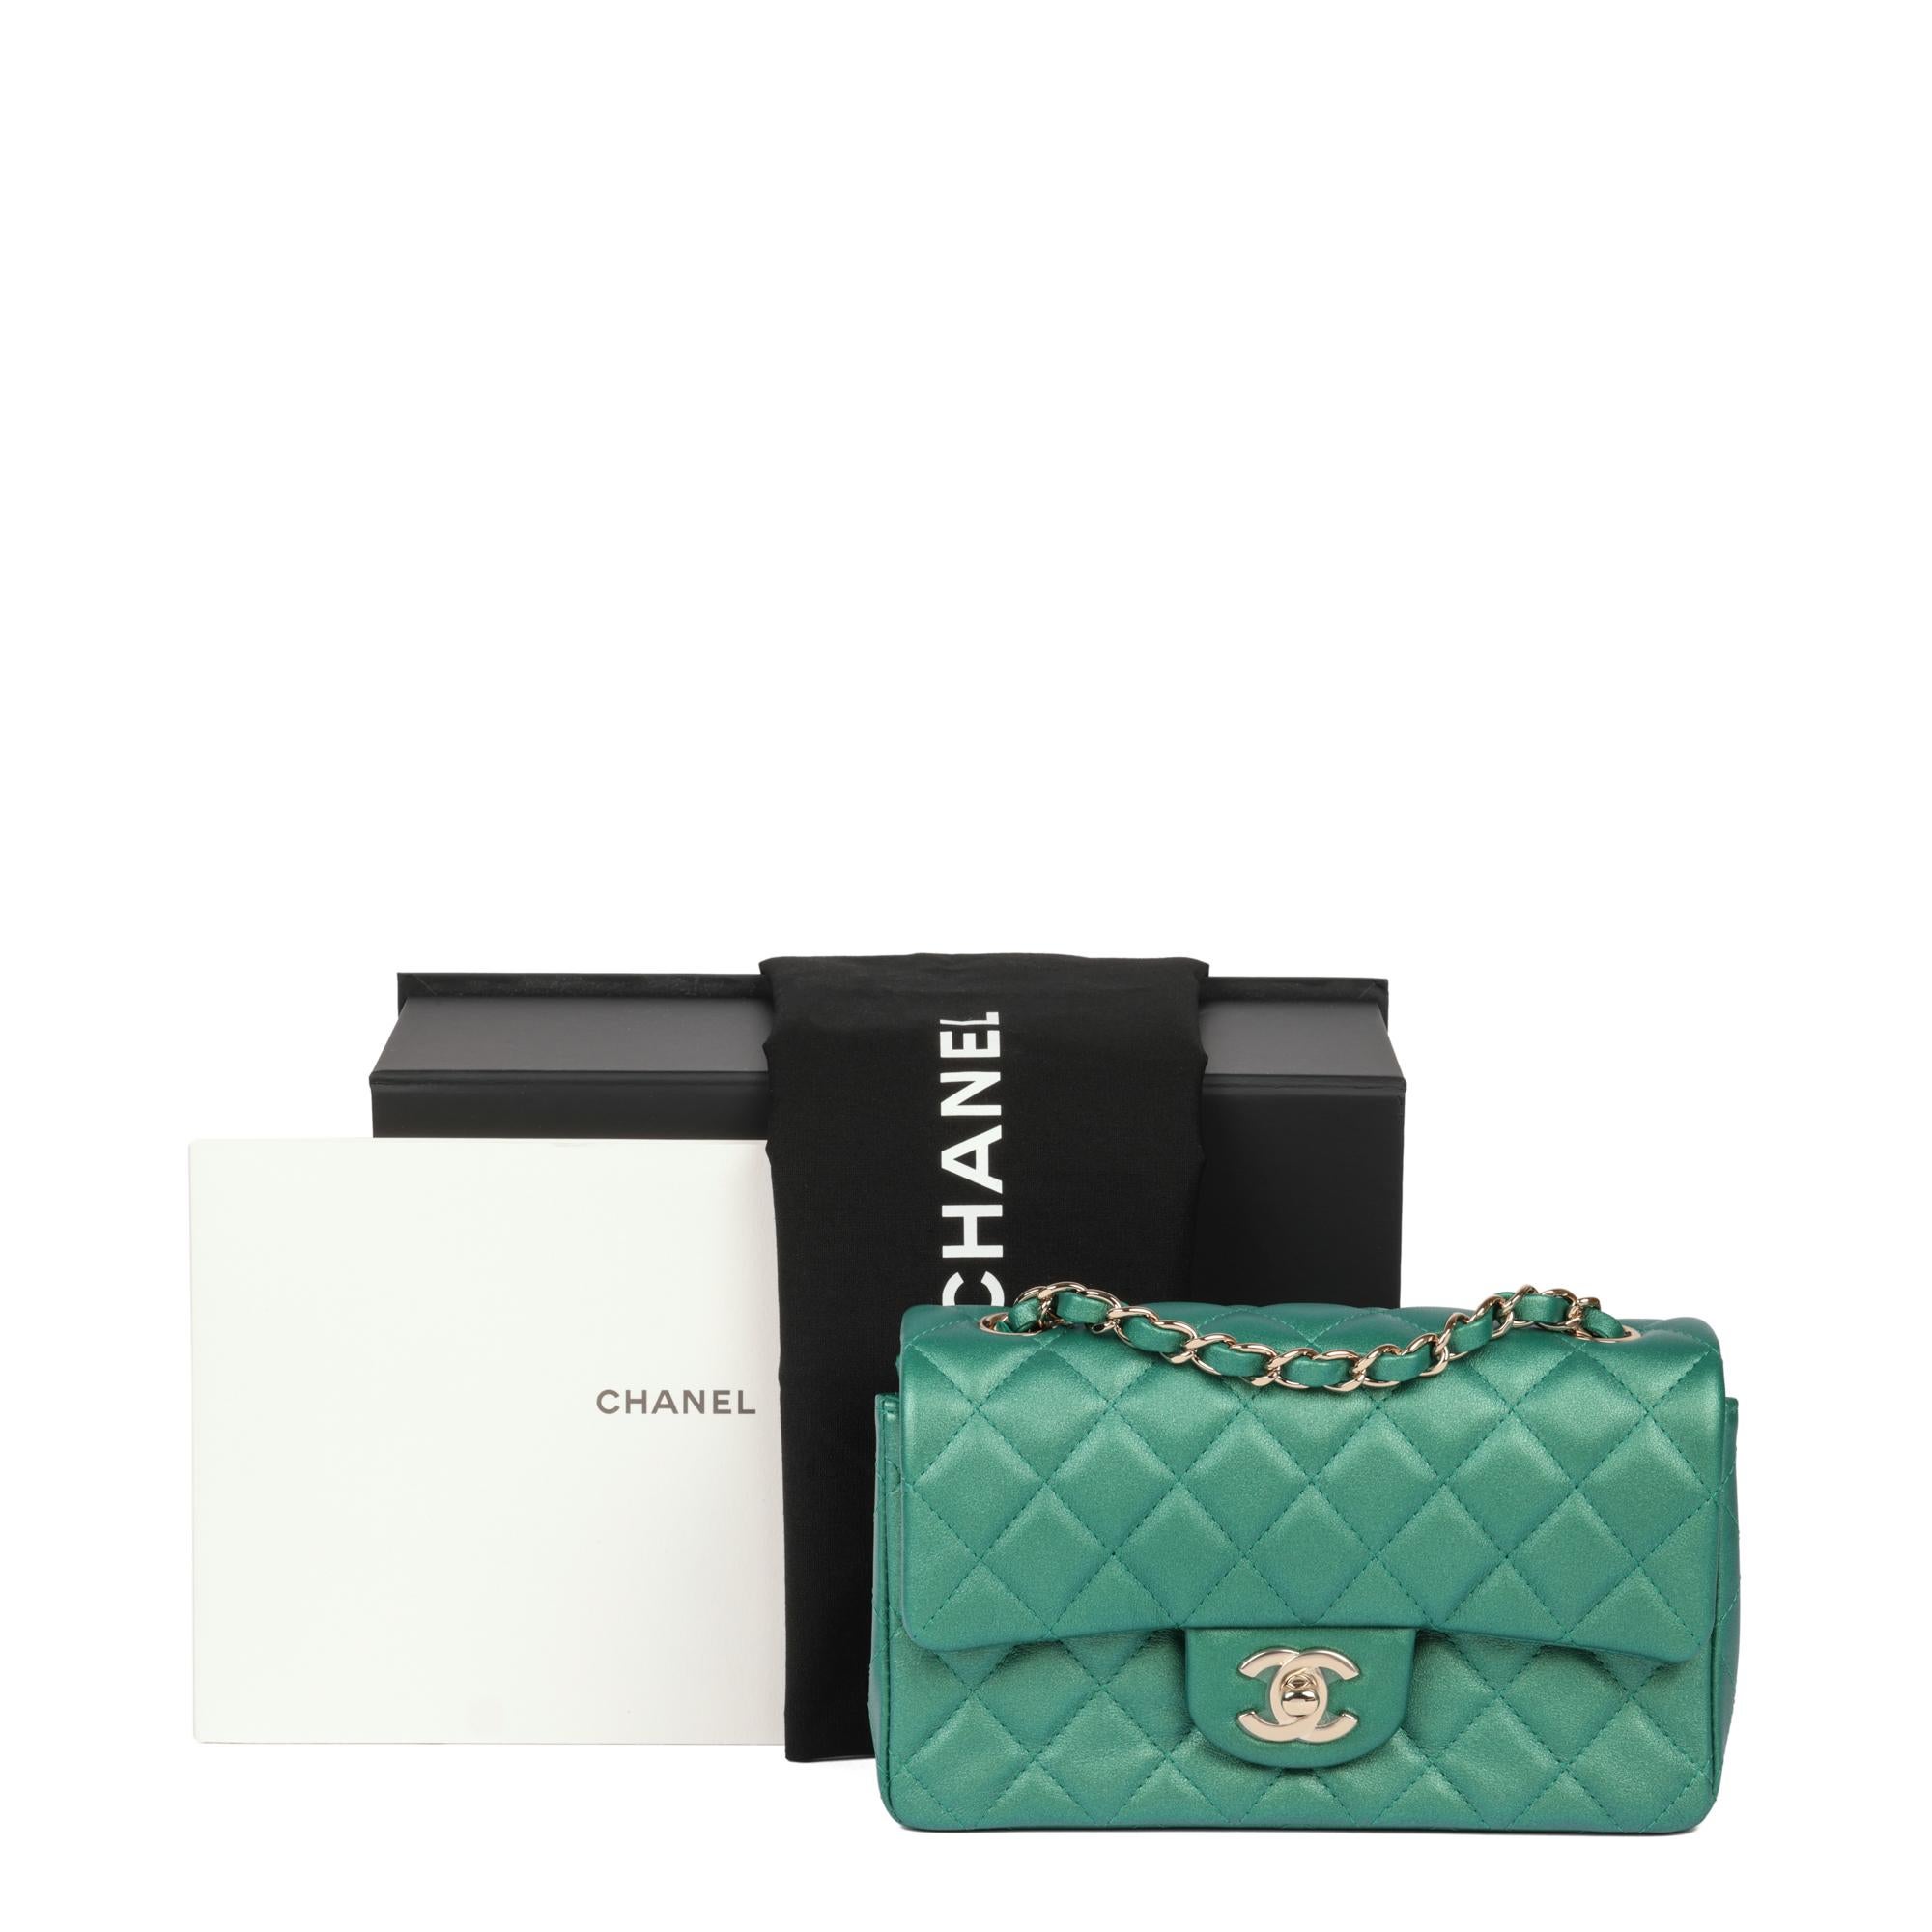 Chanel Green Iridescent Quilted Lambskin Rectangular Mini Flap Bag For Sale 8